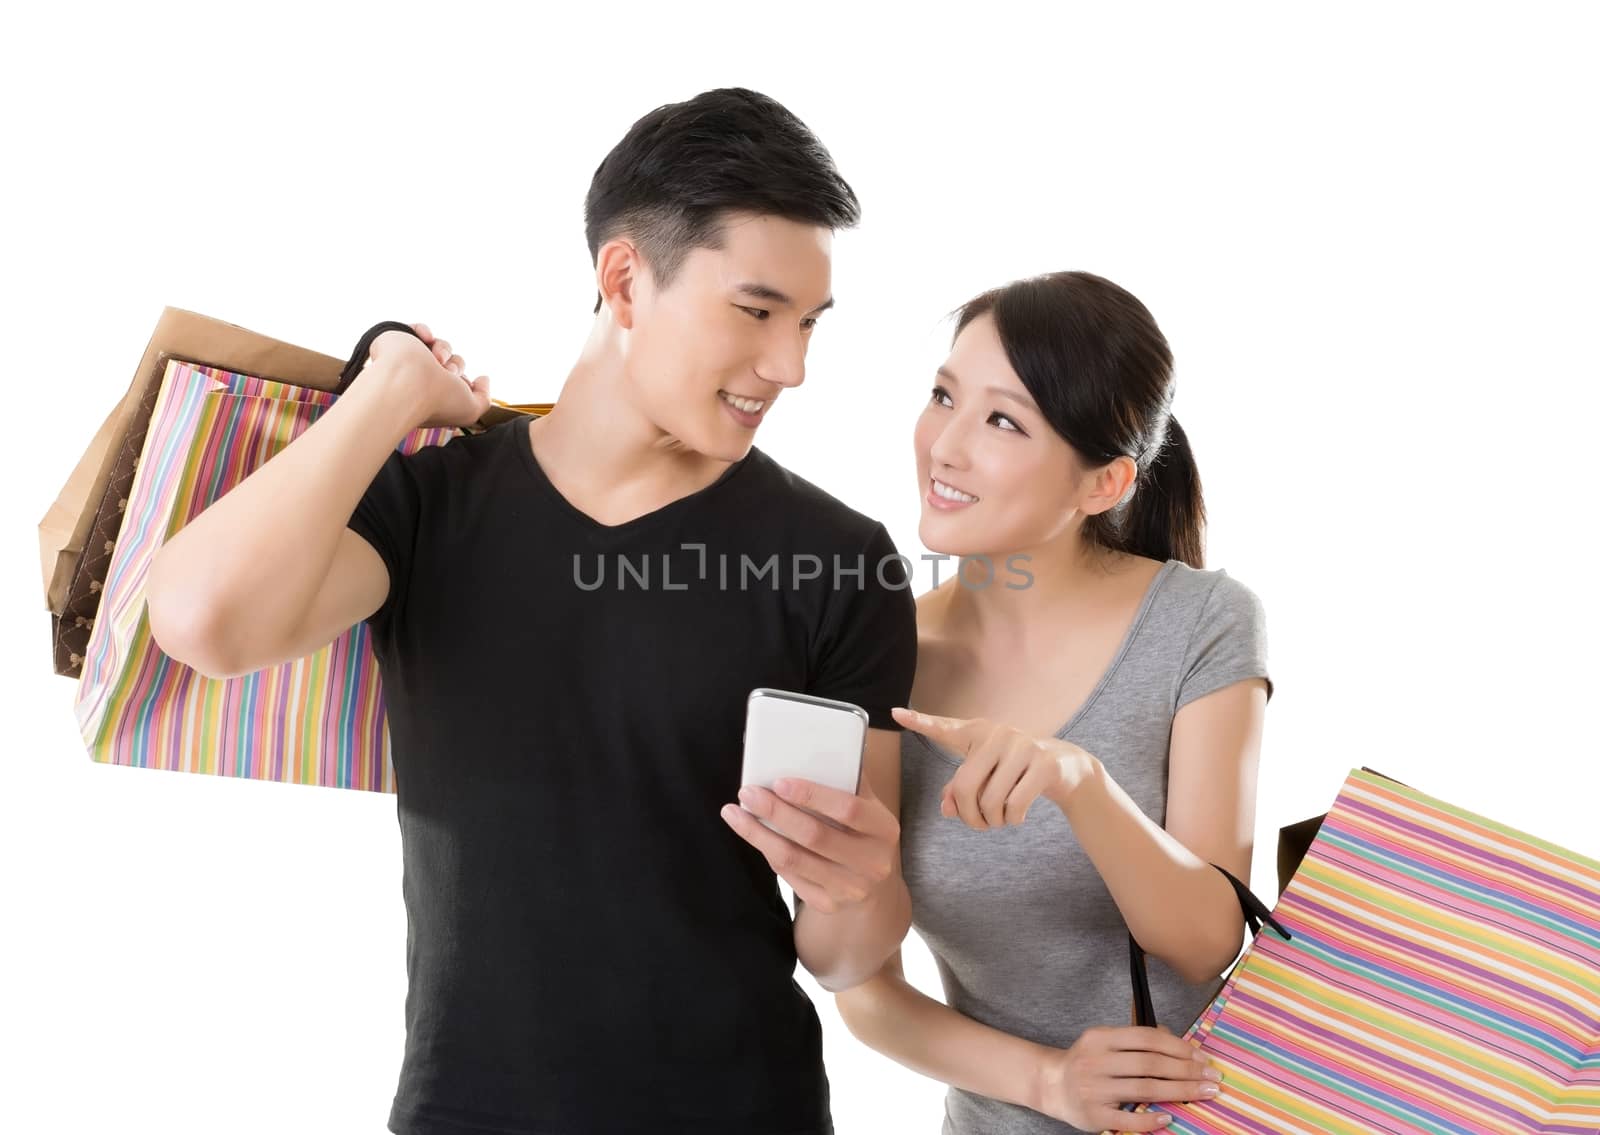 Attractive young Asian couple shopping and looking at cellphone, full length portrait isolated on white background.